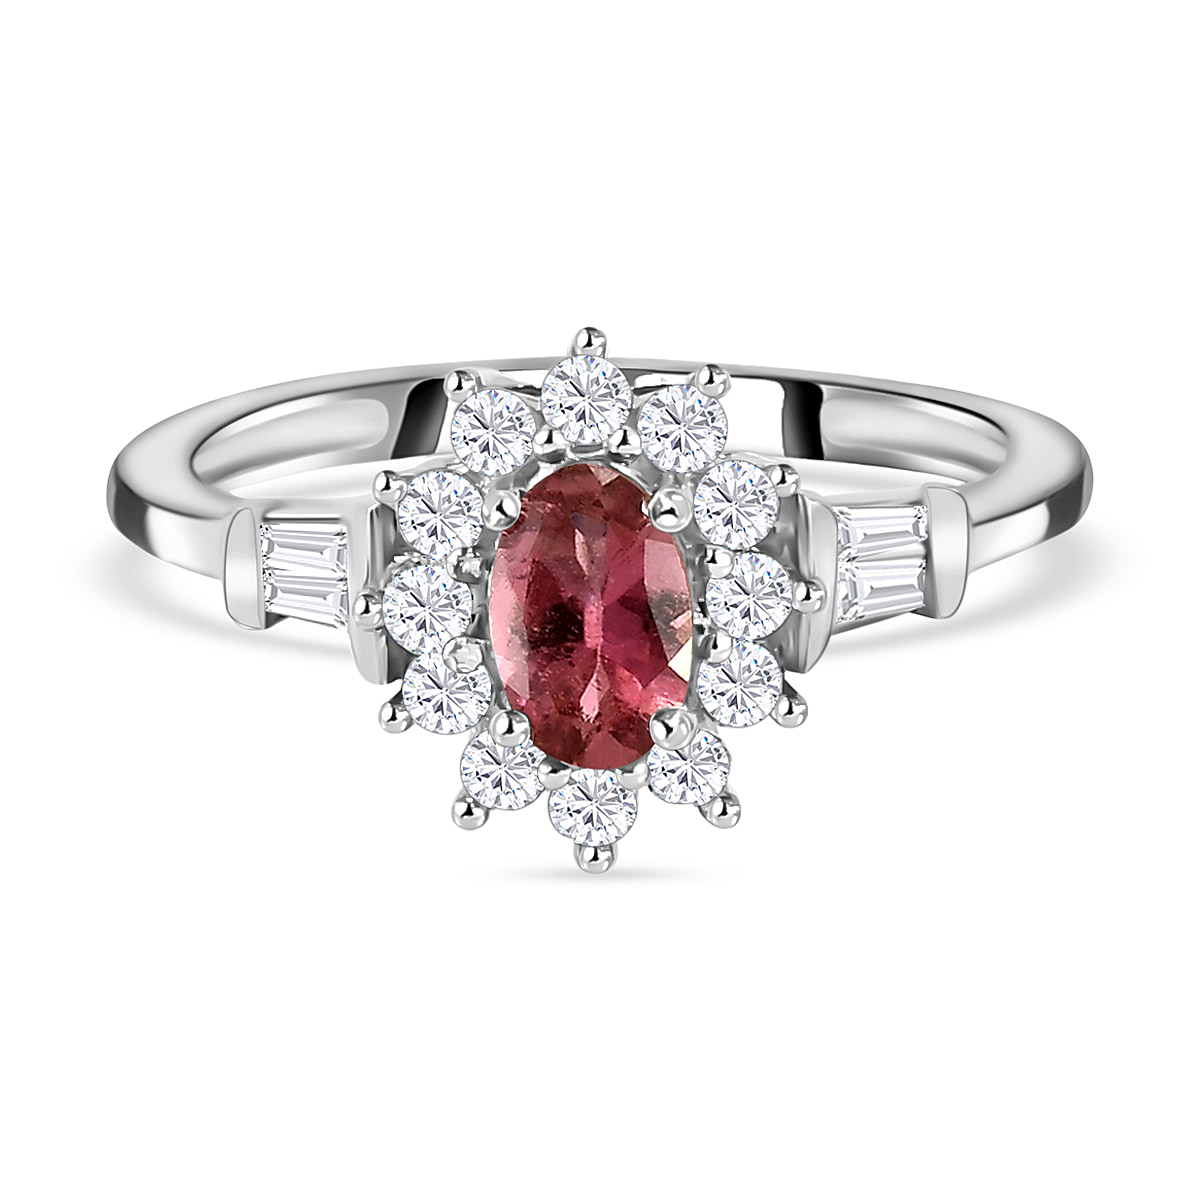 Rubellite and Natural Zircon Halo Ring in Platinum Overlay Sterling Silver.